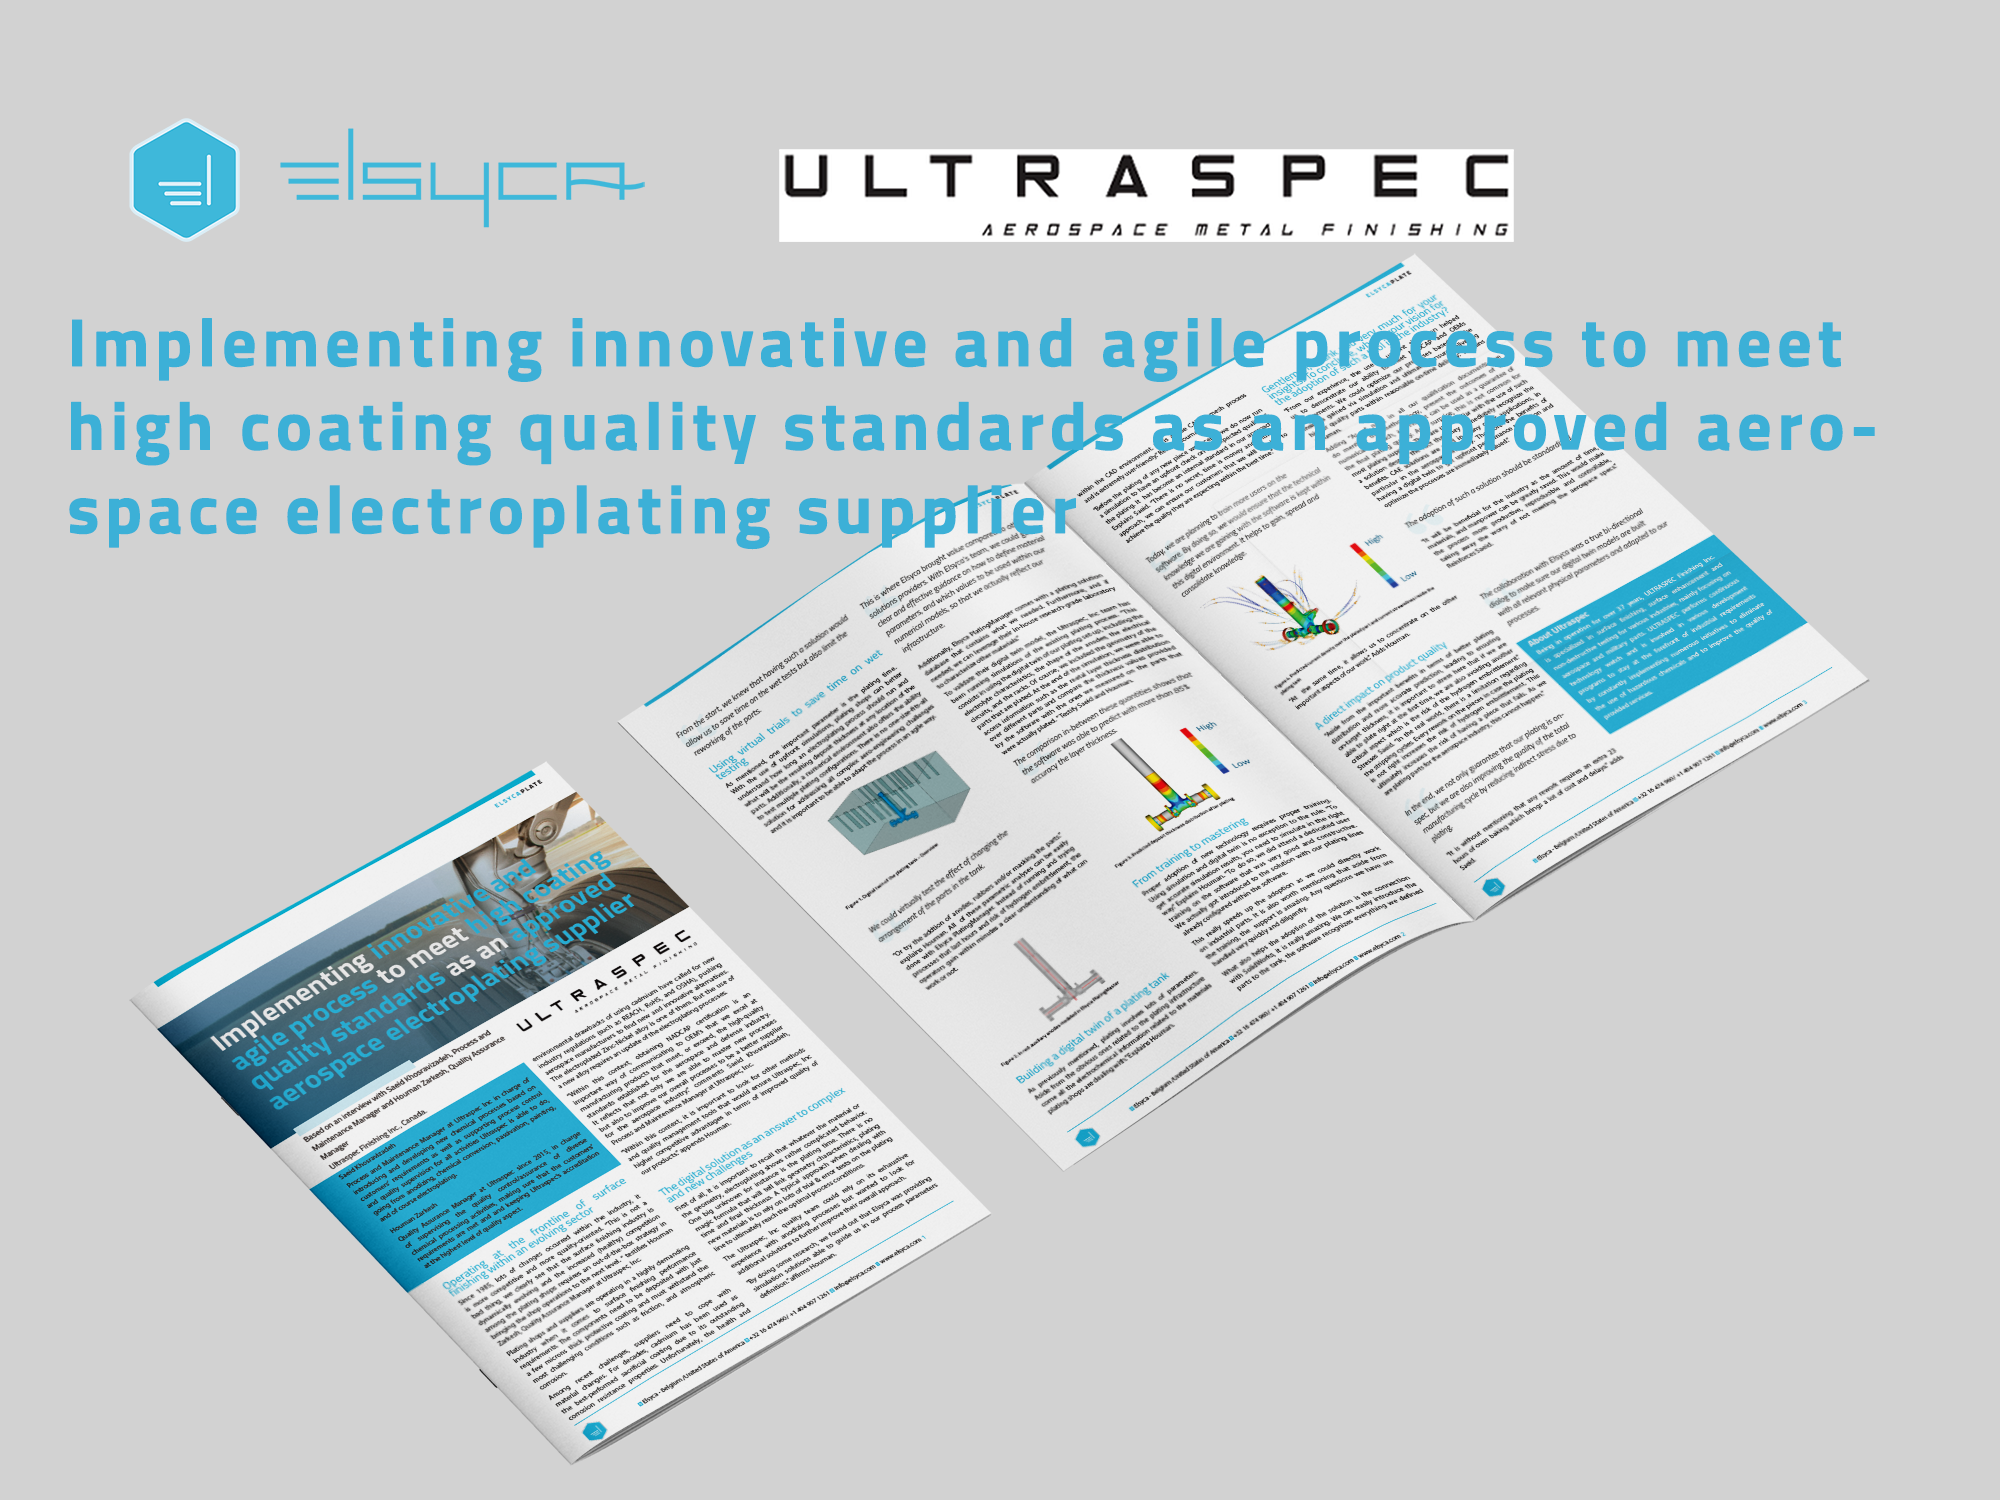 Ultraspec Inc. : Implementing innovative and agile process to meet high coating quality standards as an approved aerospace electroplating supplier.